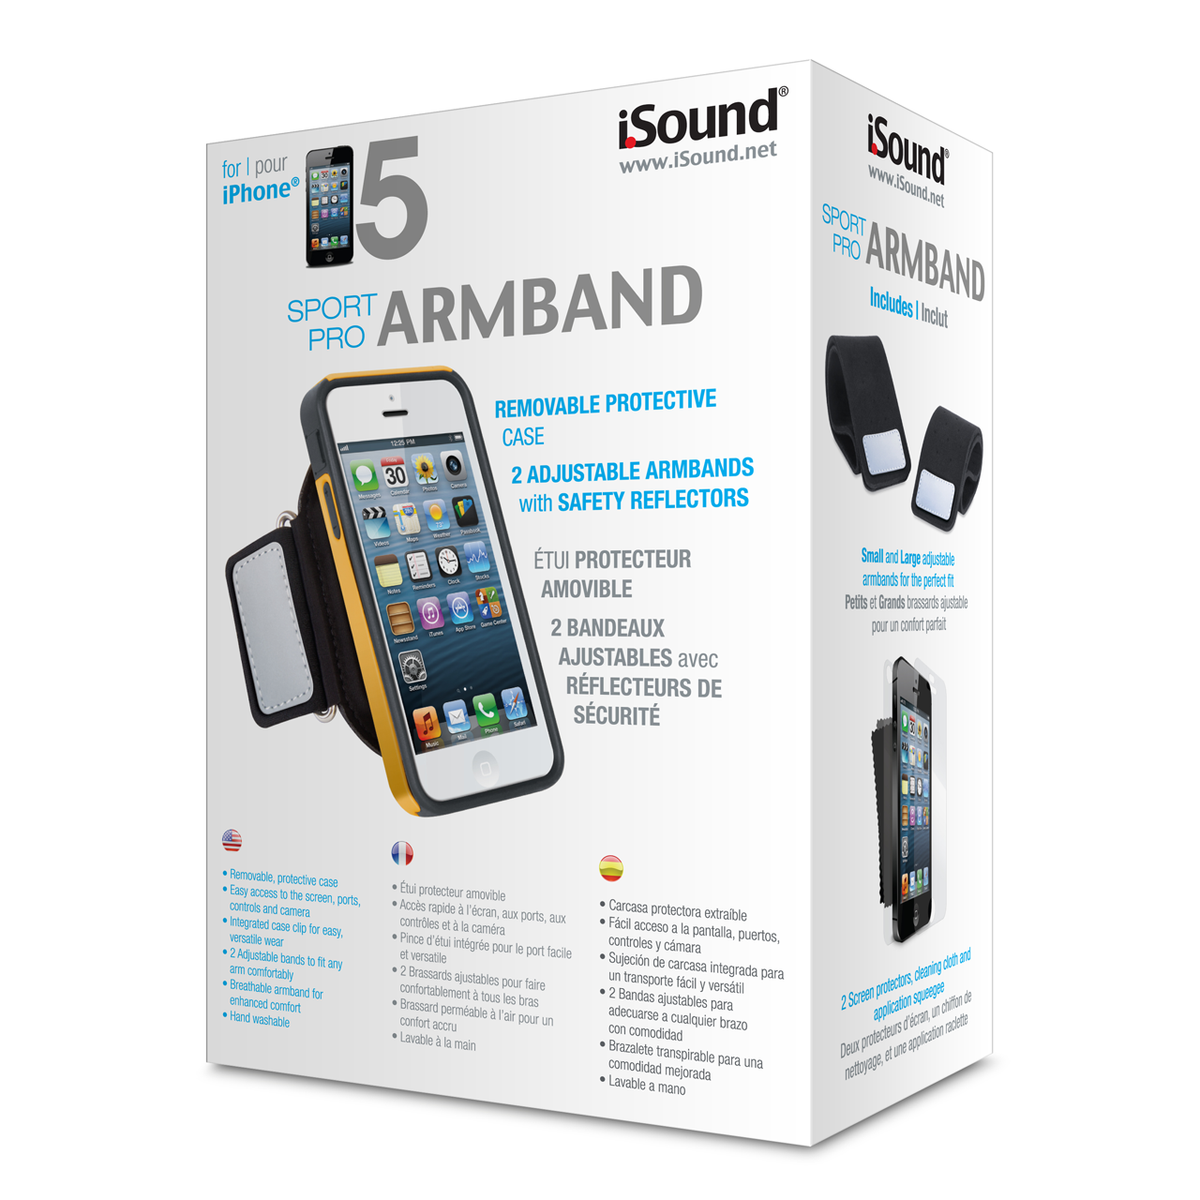 https://cdn11.bigcommerce.com/s-731n6/images/stencil/1200x1200/products/102/440/ISOUND_5311_SPORTS_ARMBAND_PRO_IPHONE_5_BACK_PK_H__16493.1422922481.png?c=2